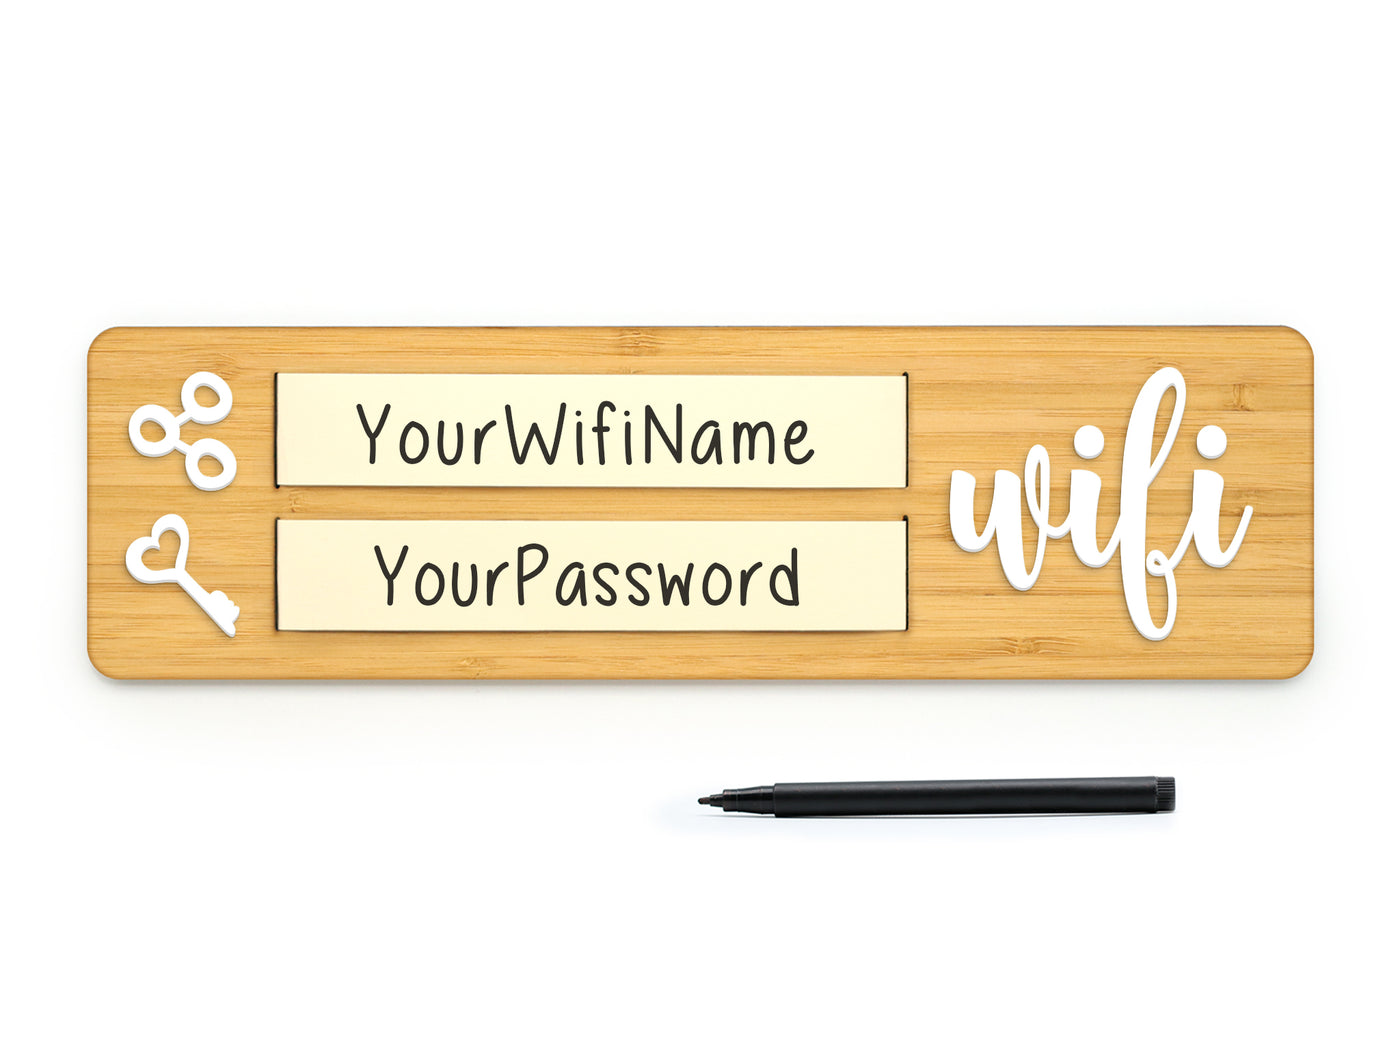 Brush - Welcome WiFi Sign - Free WiFi Zone Sign, Guest Internet Login Password